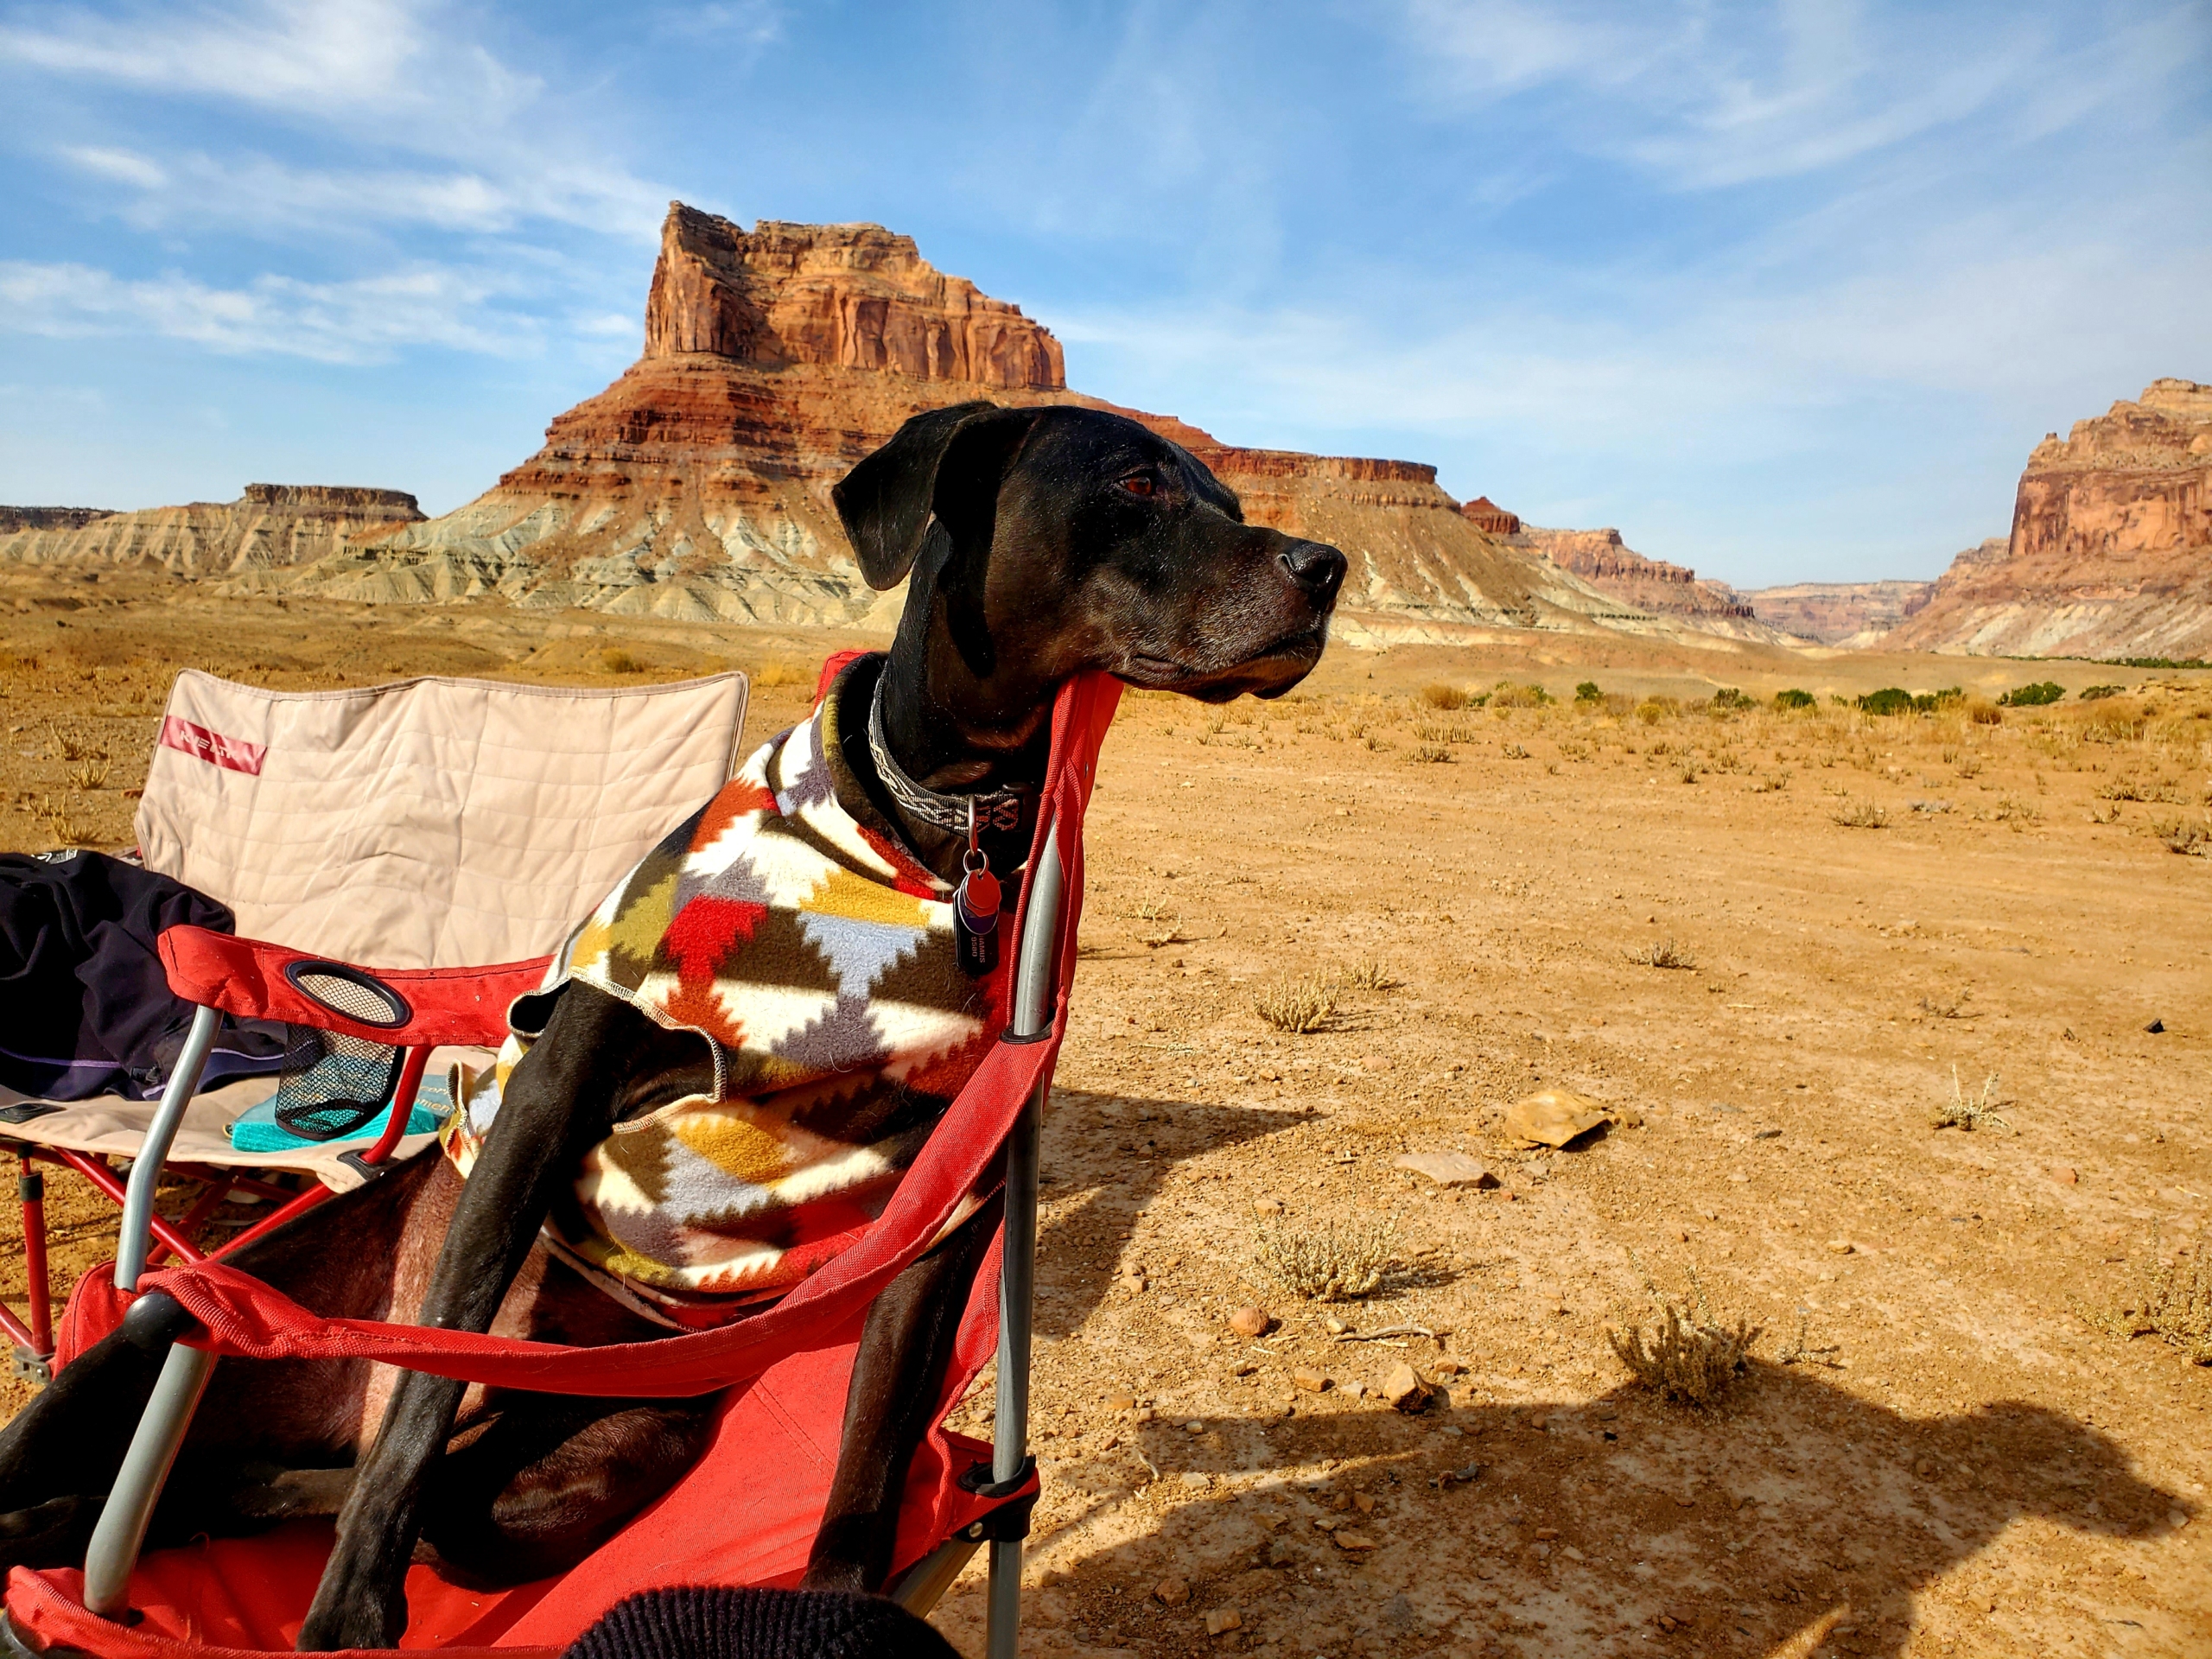 A black labrador/Dane/pit mutt in a multi-colored geometric-patterned sweater sits in a red lawn chair in the desert, under a bl